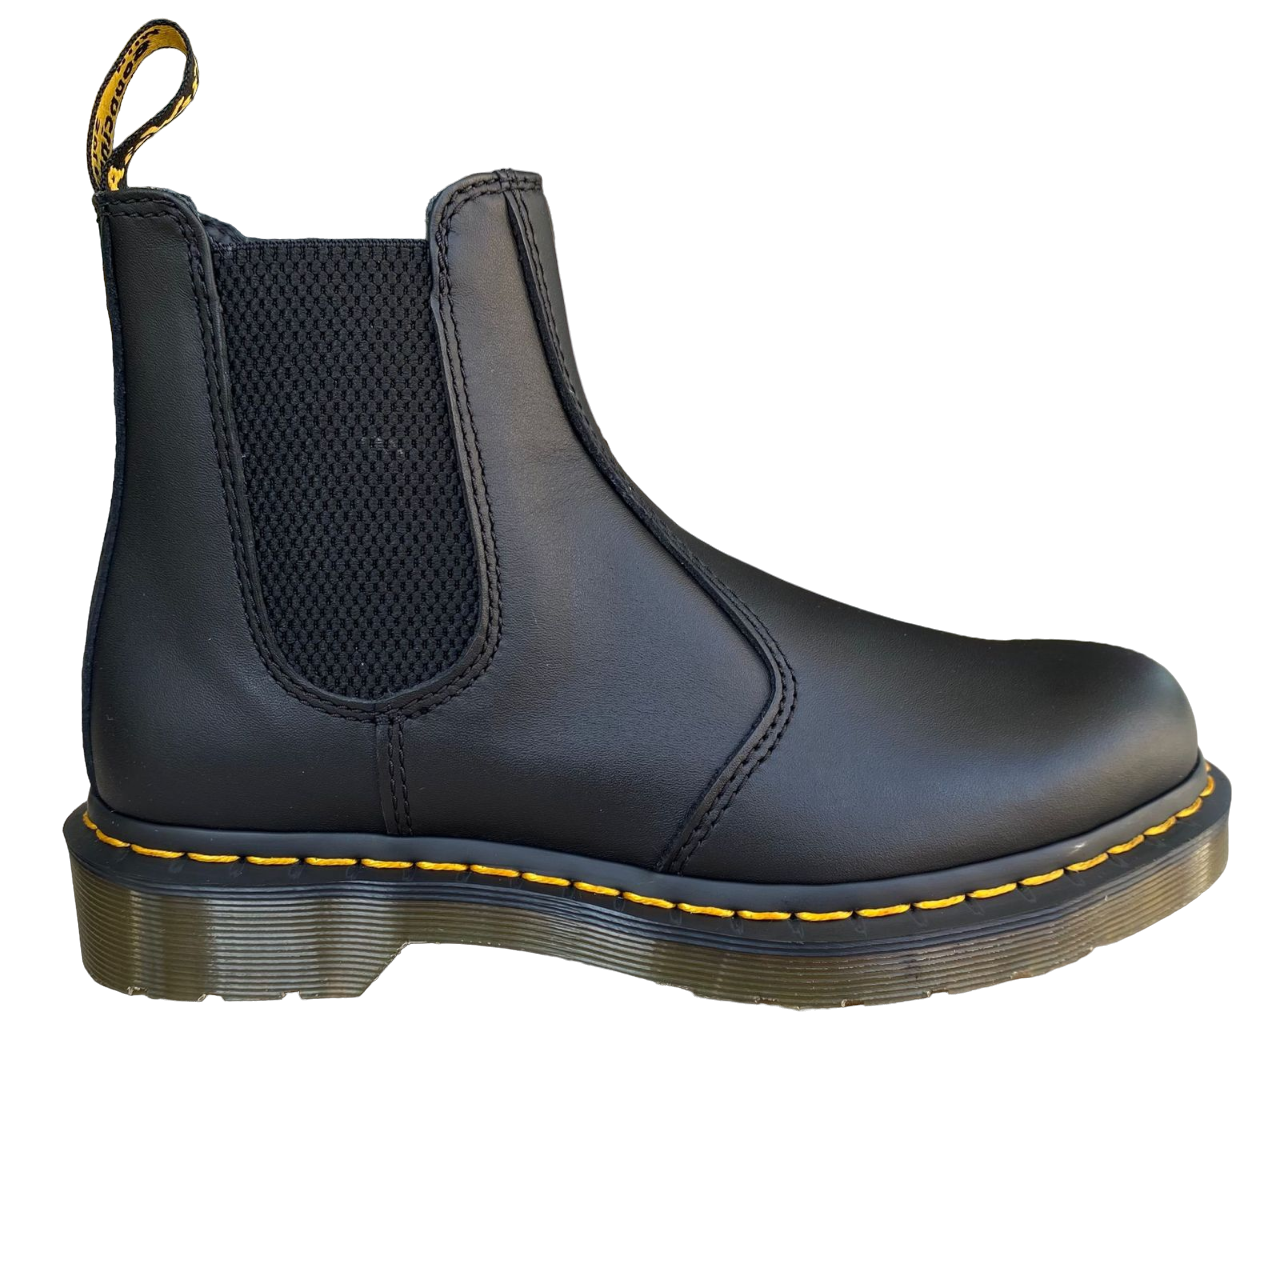 Dr. Martens Beatles ankle boot 2976 27100001 black nappa